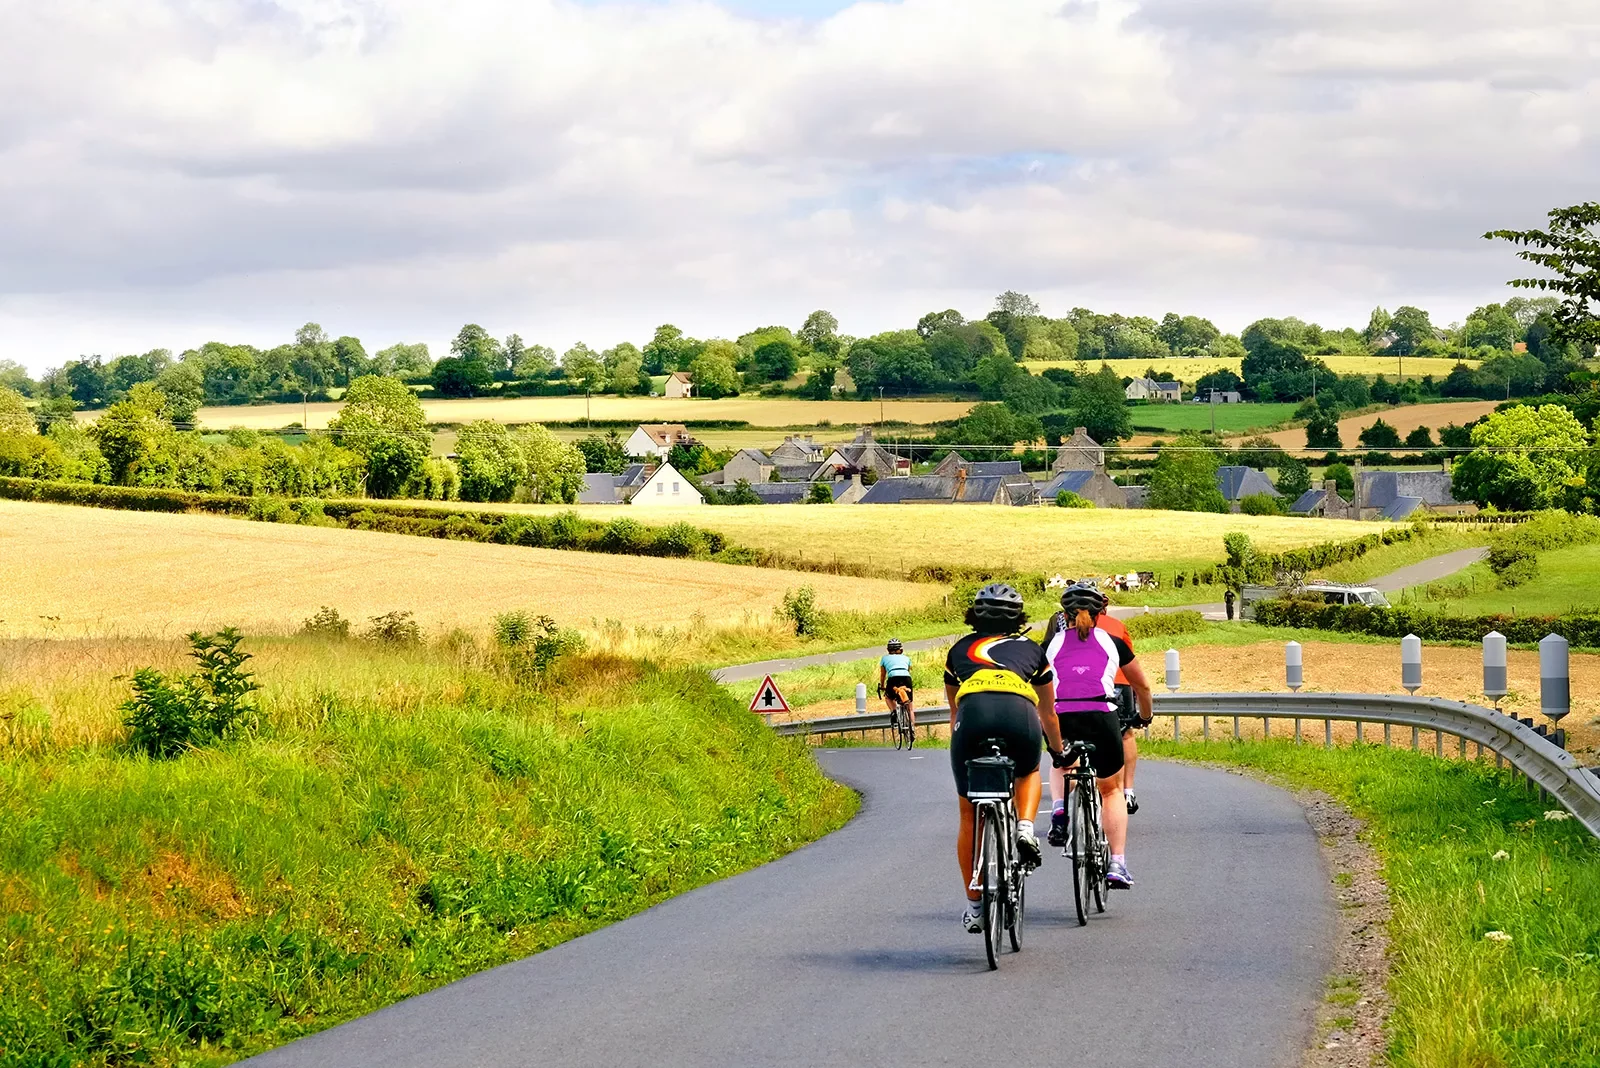 Cyclists riding through countryside